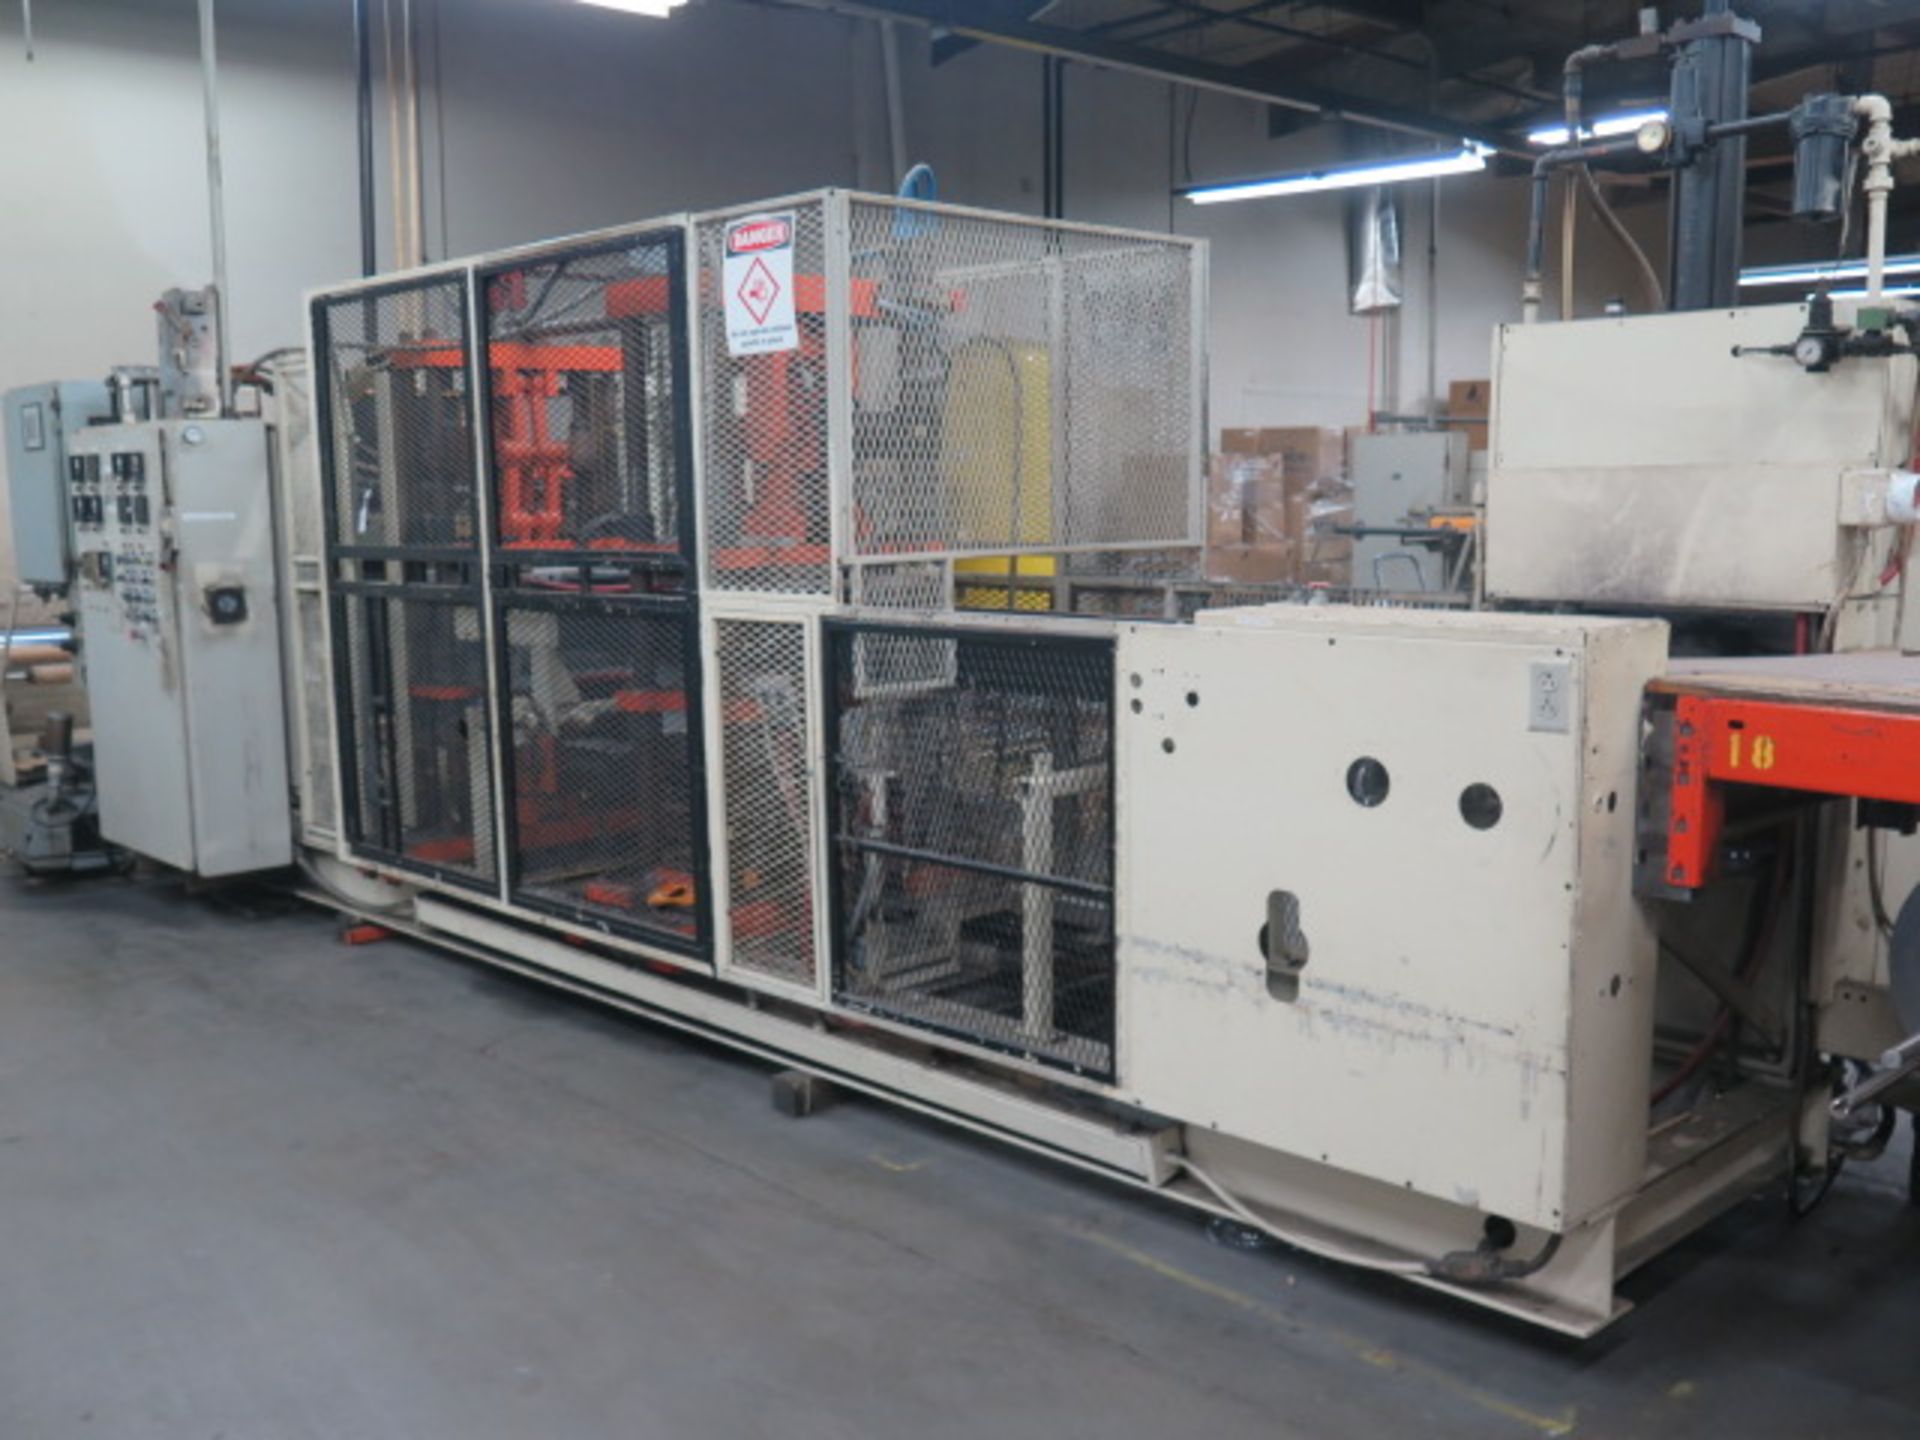 Sencorp Systems Thermoforming w/ Sencorp Controls, Film Preheater, 10” x 30” Vacuum, SOLD AS IS - Image 2 of 30